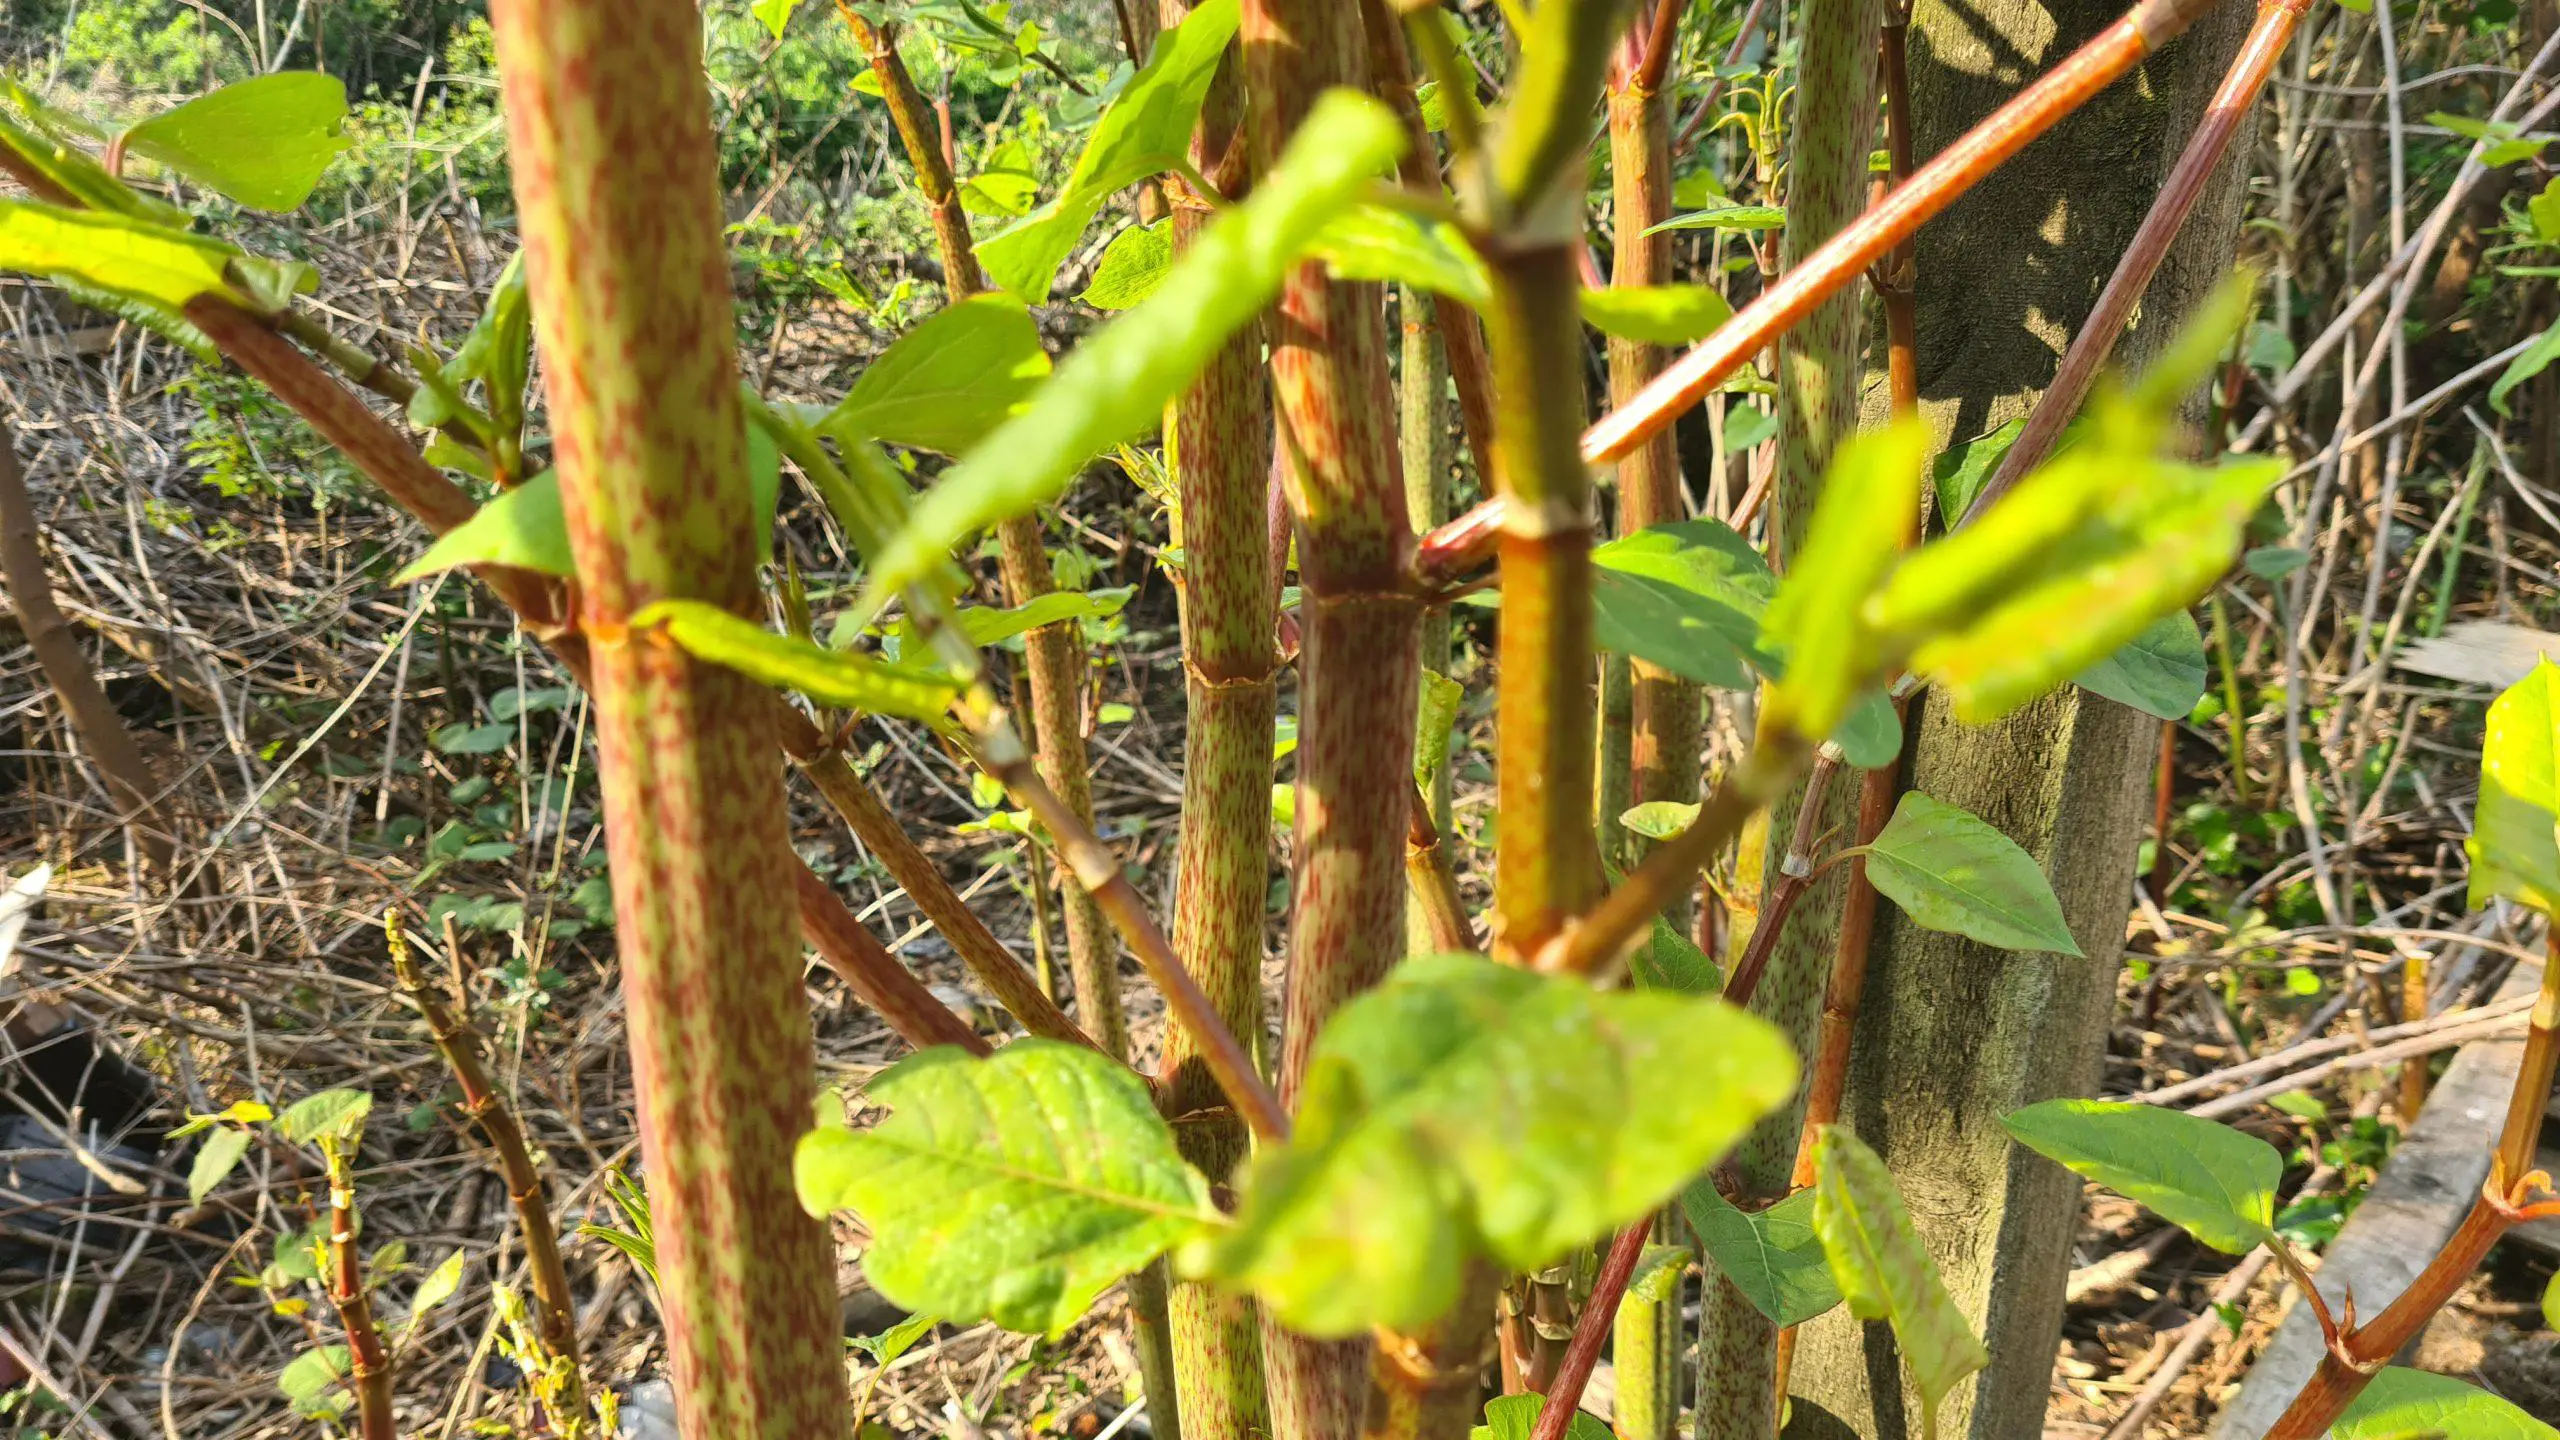 As the plant develops the stems elongate with their distinctive speckling of red on green